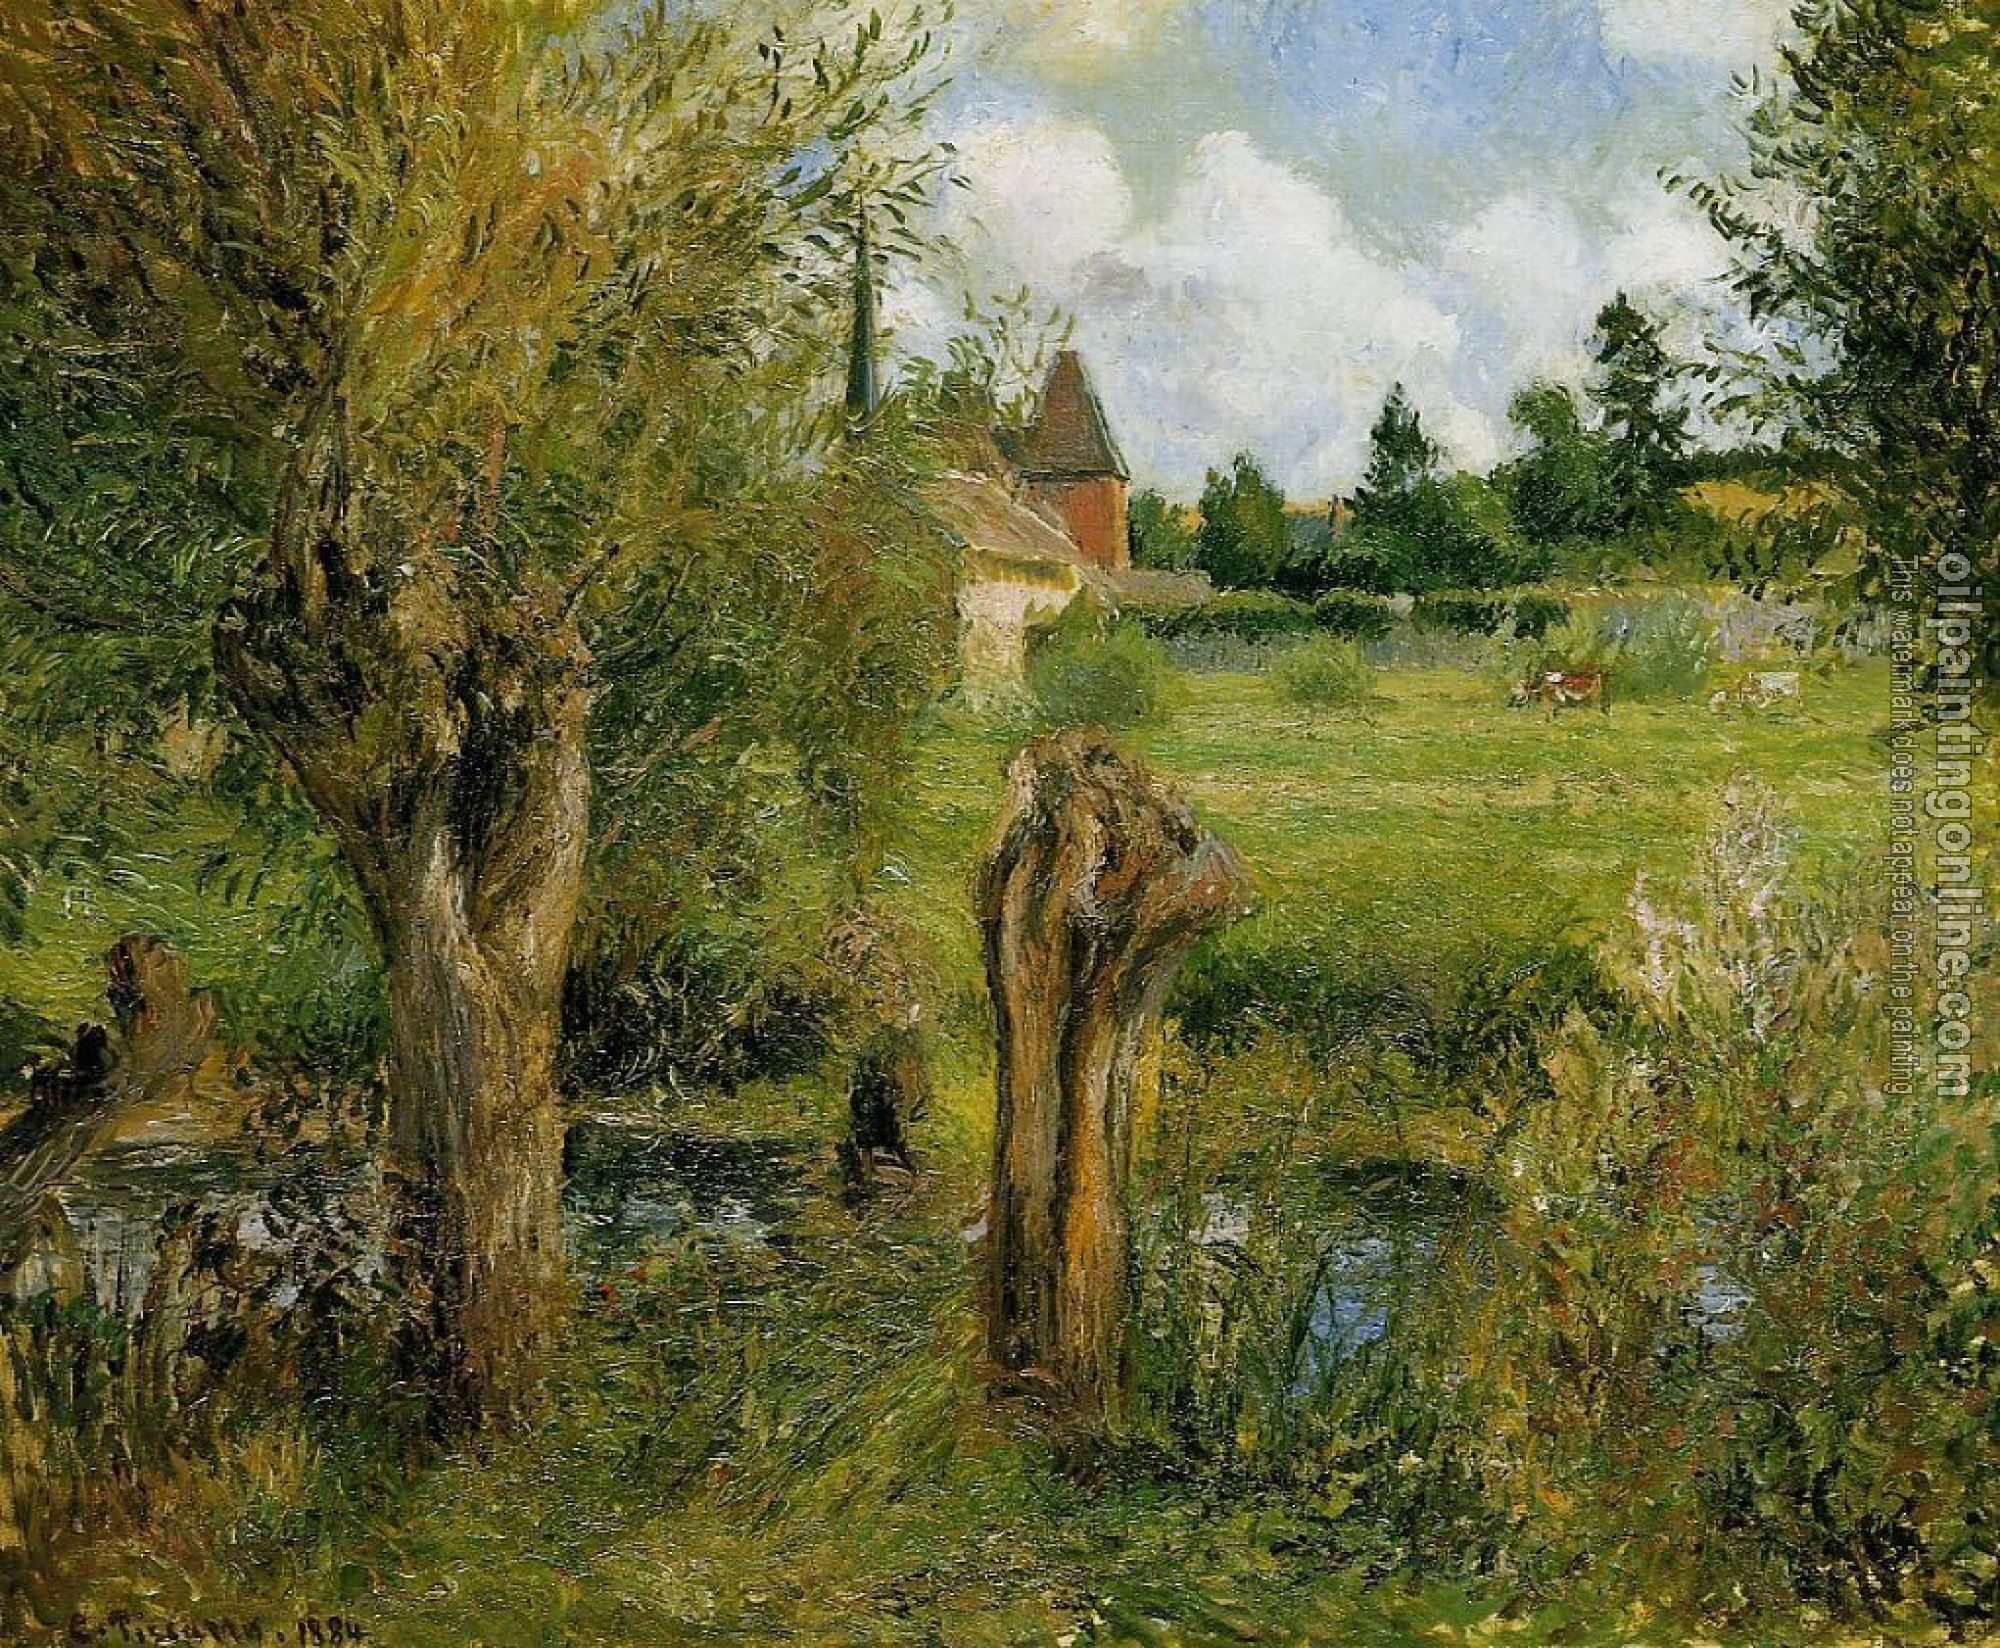 Pissarro, Camille - The Banks of the Epte at Eragny